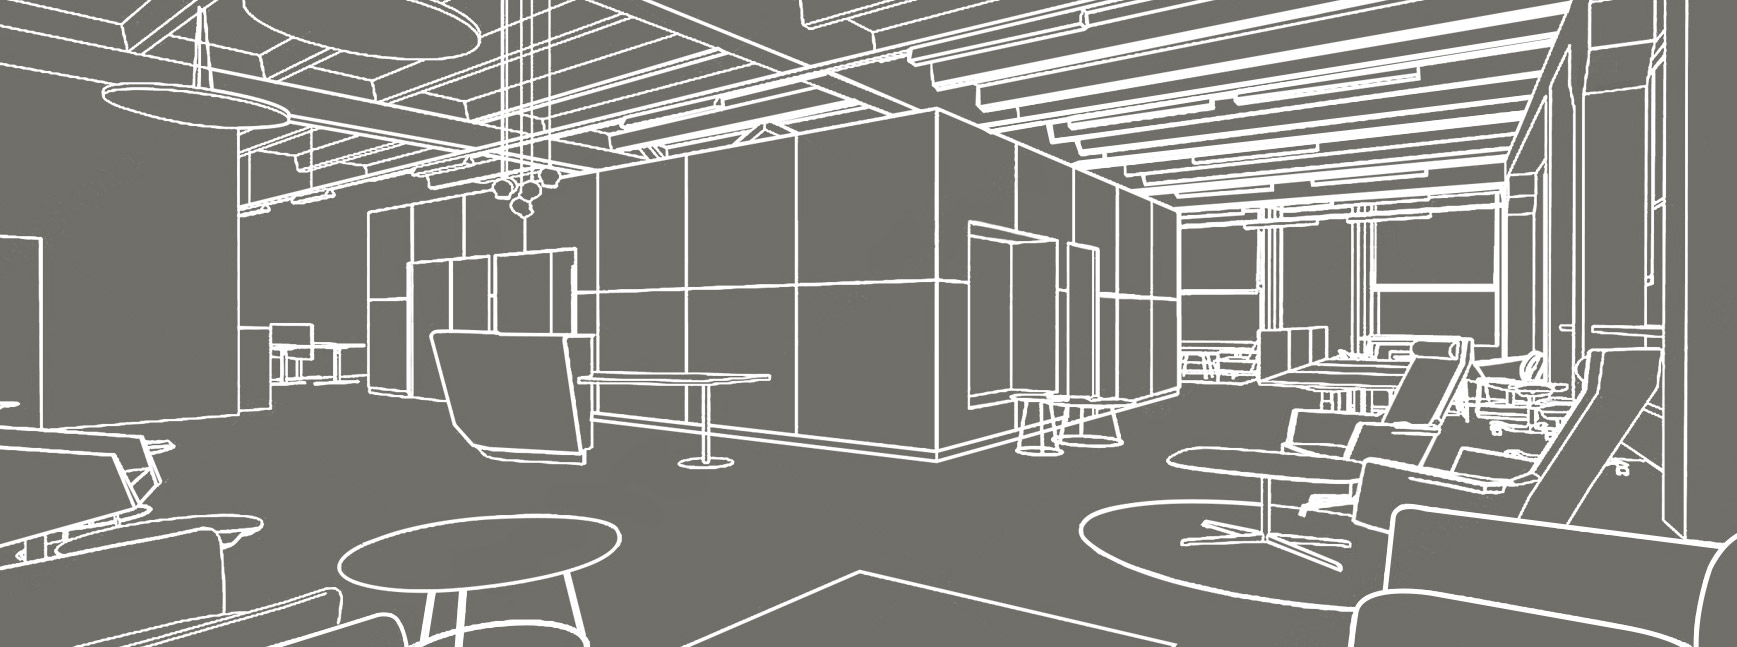 rendering of a designed space